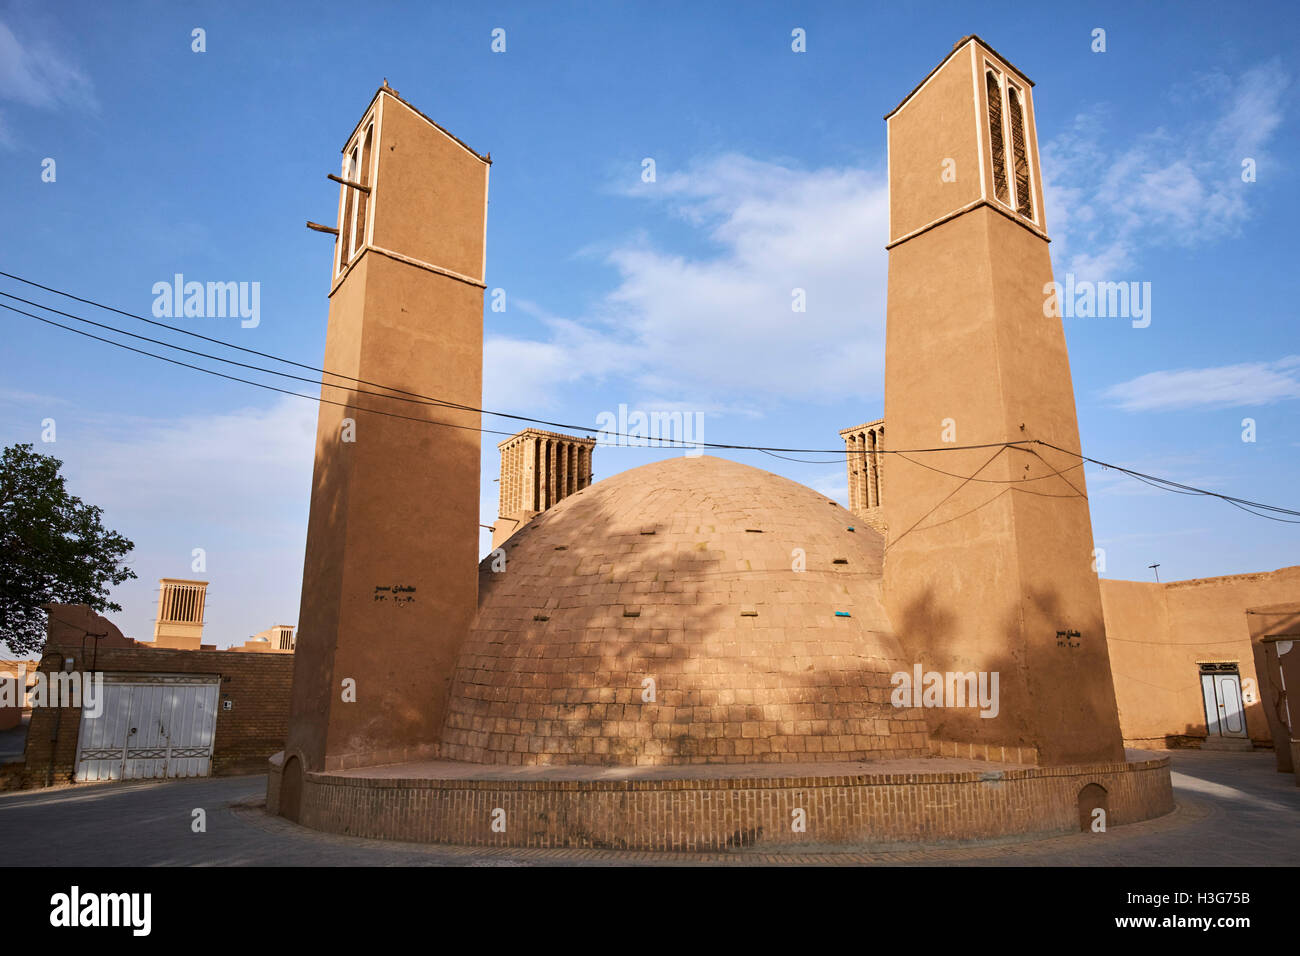 Iran, Yazd province, Yazd, old water reservoir surrounded by 4 windtowers Stock Photo